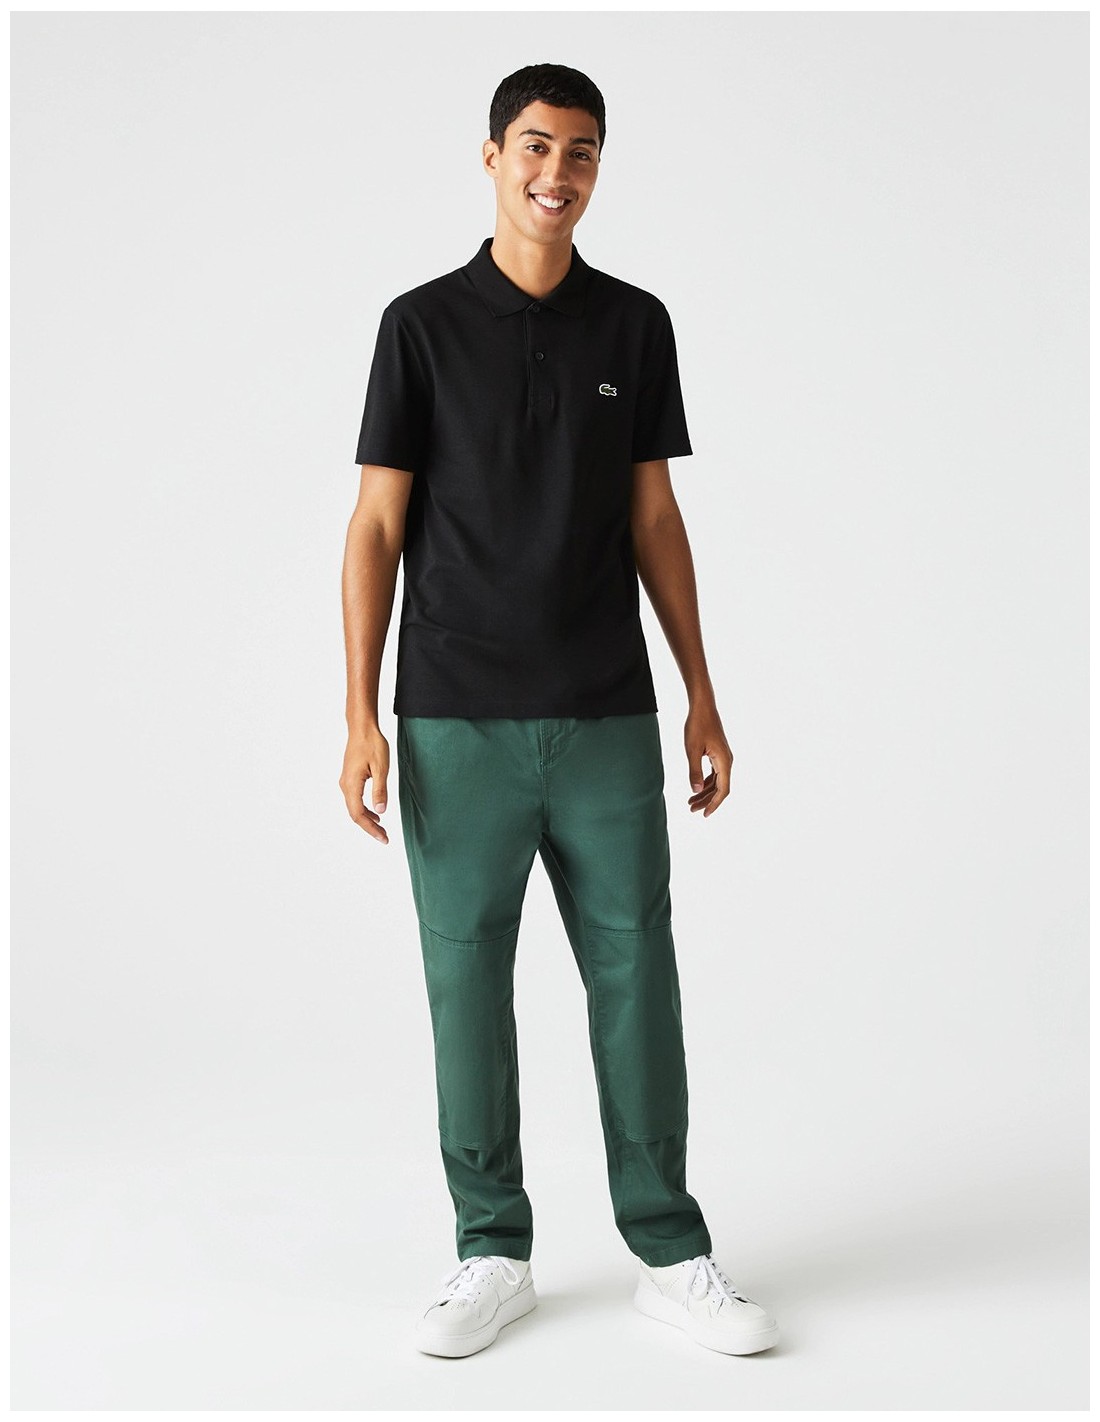 POLO LACOSTE REGULAR FIT NEGRO